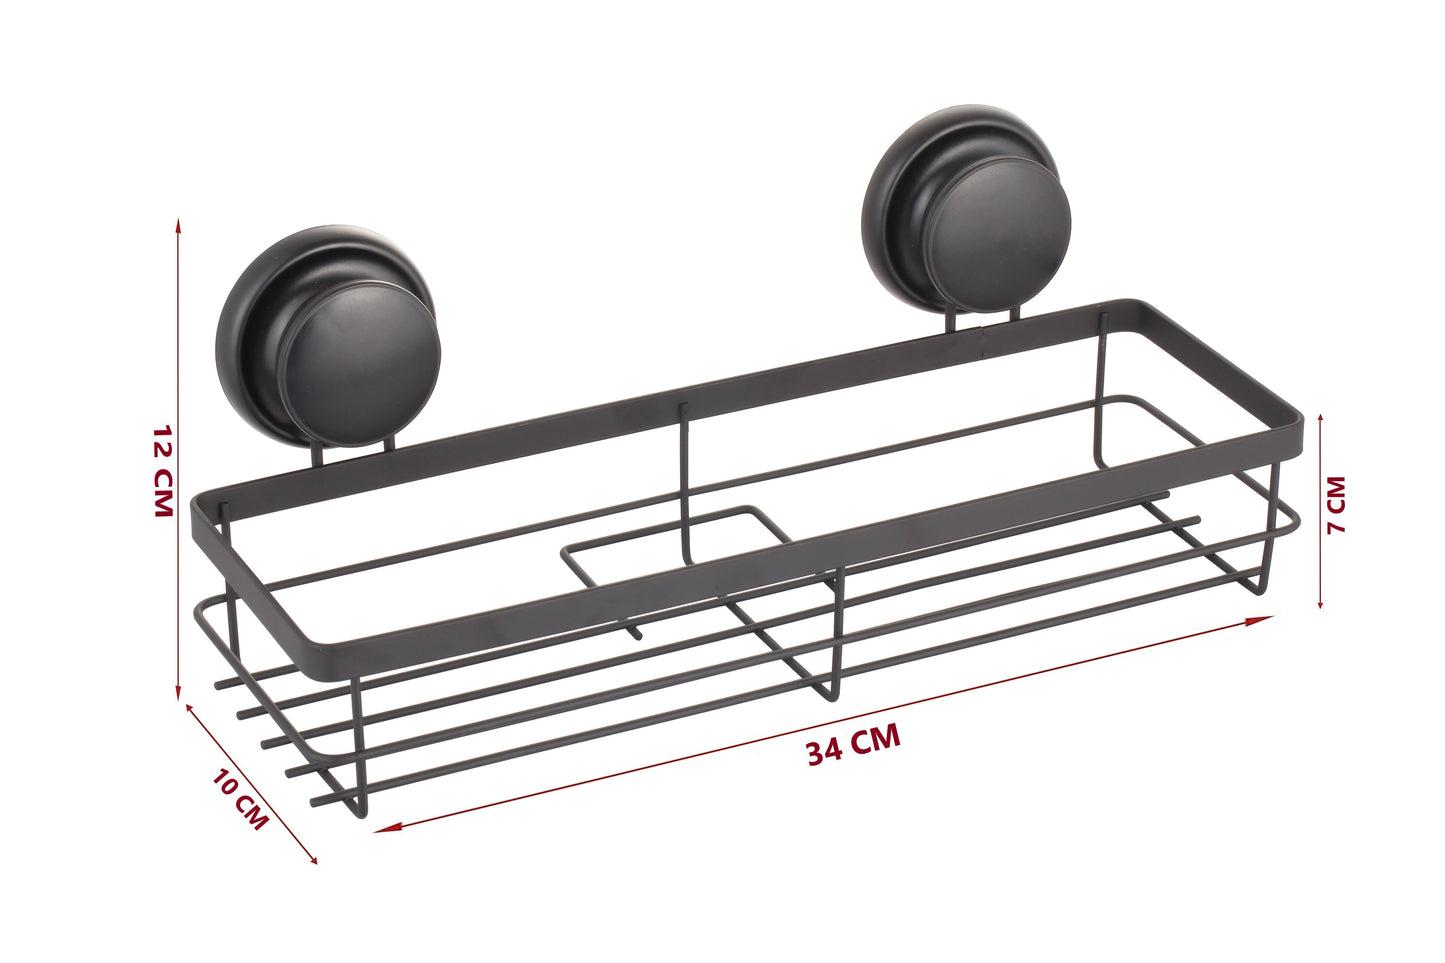 2 Pack Rectangular Corner Shower Caddy Shelf Basket Rack with Premium Vacuum Suction Cup No-Drilling for Bathroom and Kitchen